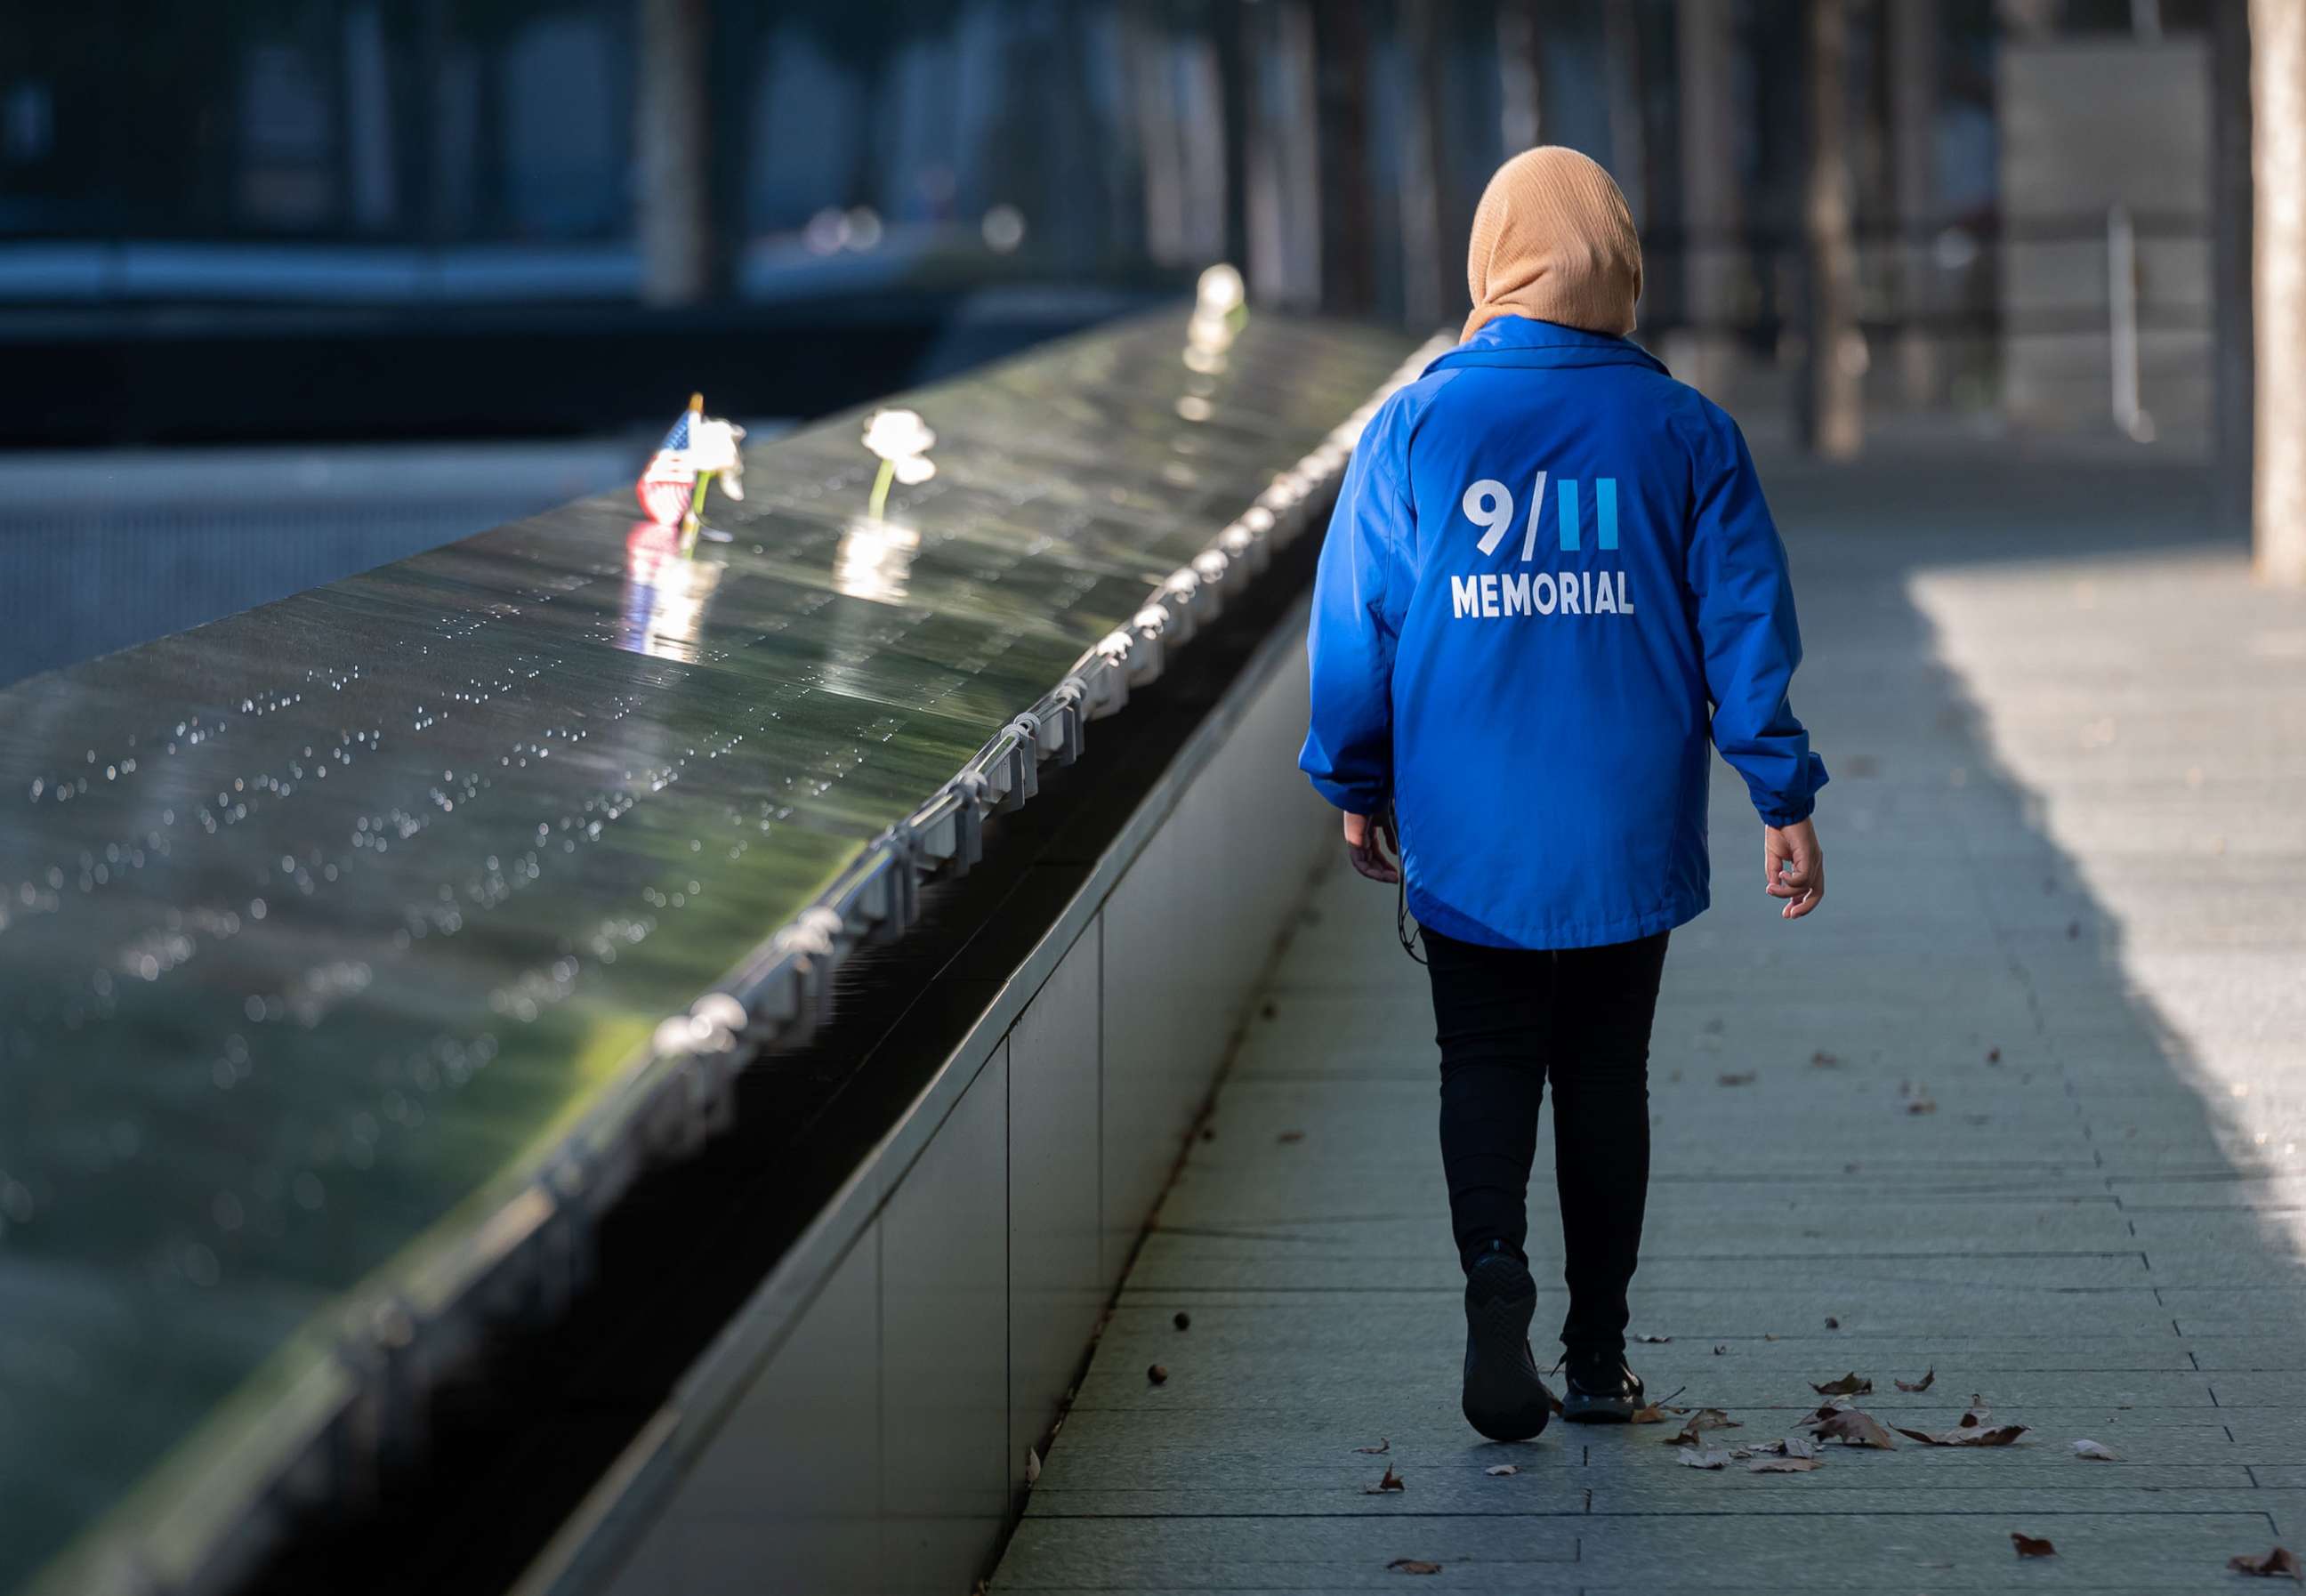 PHOTO: A person walks at the 9/11 Memorial & Museum in World Trade Center as the city continues Phase 4 of re-opening following restrictions imposed to slow the spread of coronavirus in New York, Sept. 30, 2020.